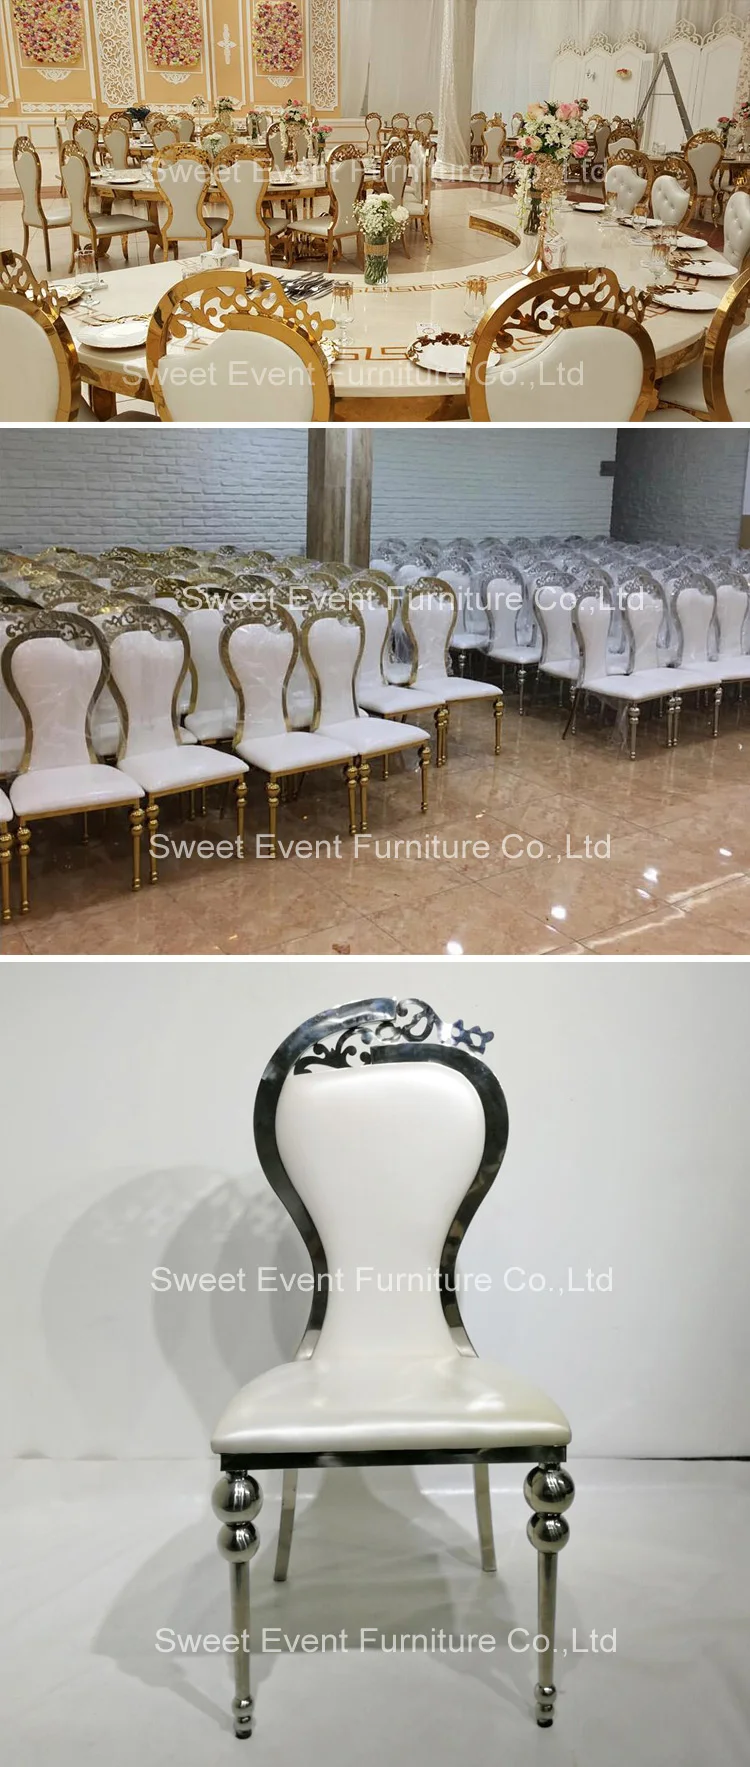 2018 Factory Price Wholesale Cheap Rentals Types Of Wedding Chairs